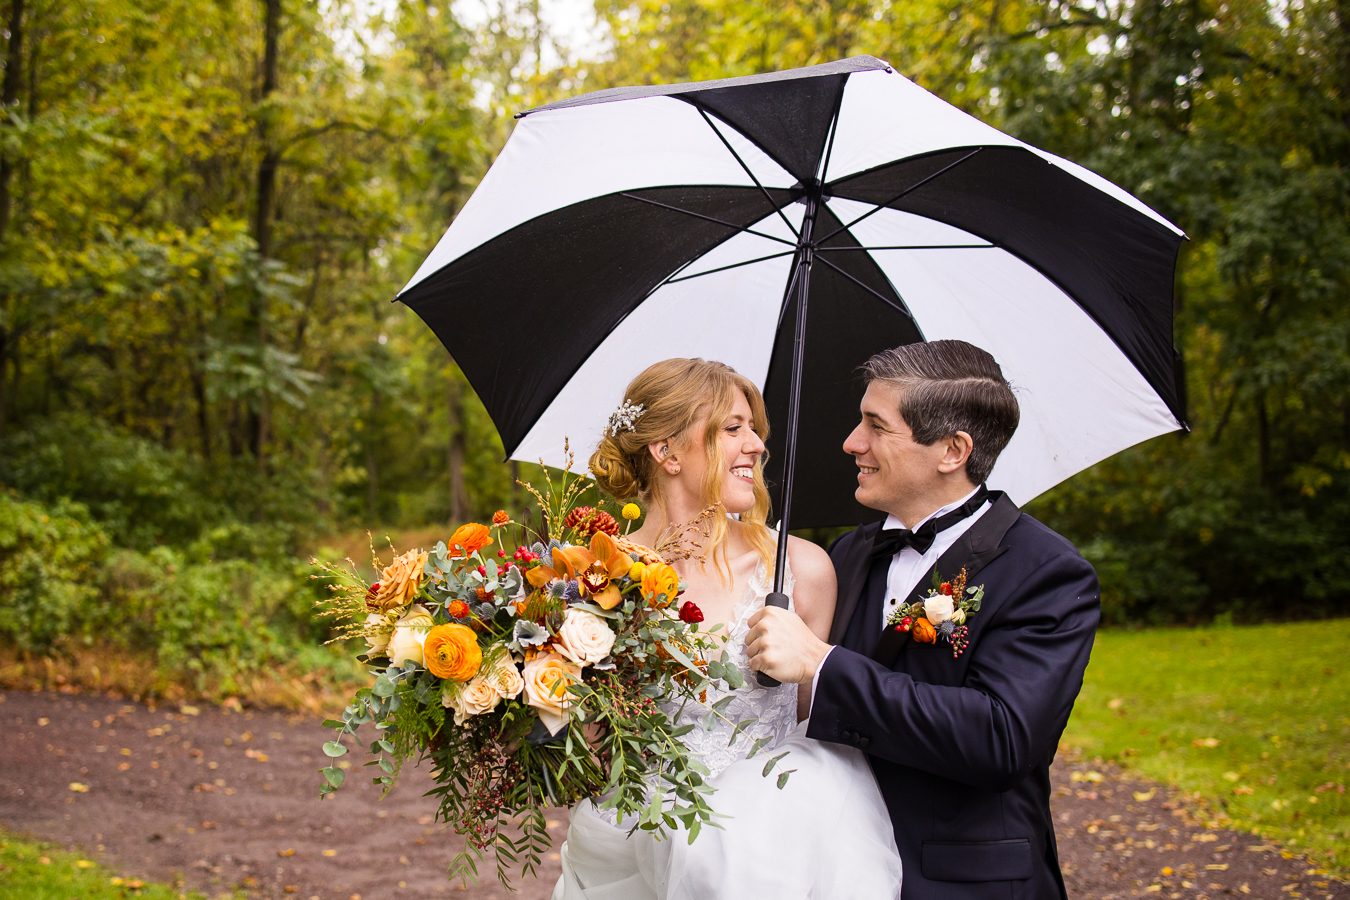 fun, unique romantic portrait of the bride and groom as they share an umbrella and walk down the paths as they smile at each other despite the rainy wedding day they are having 